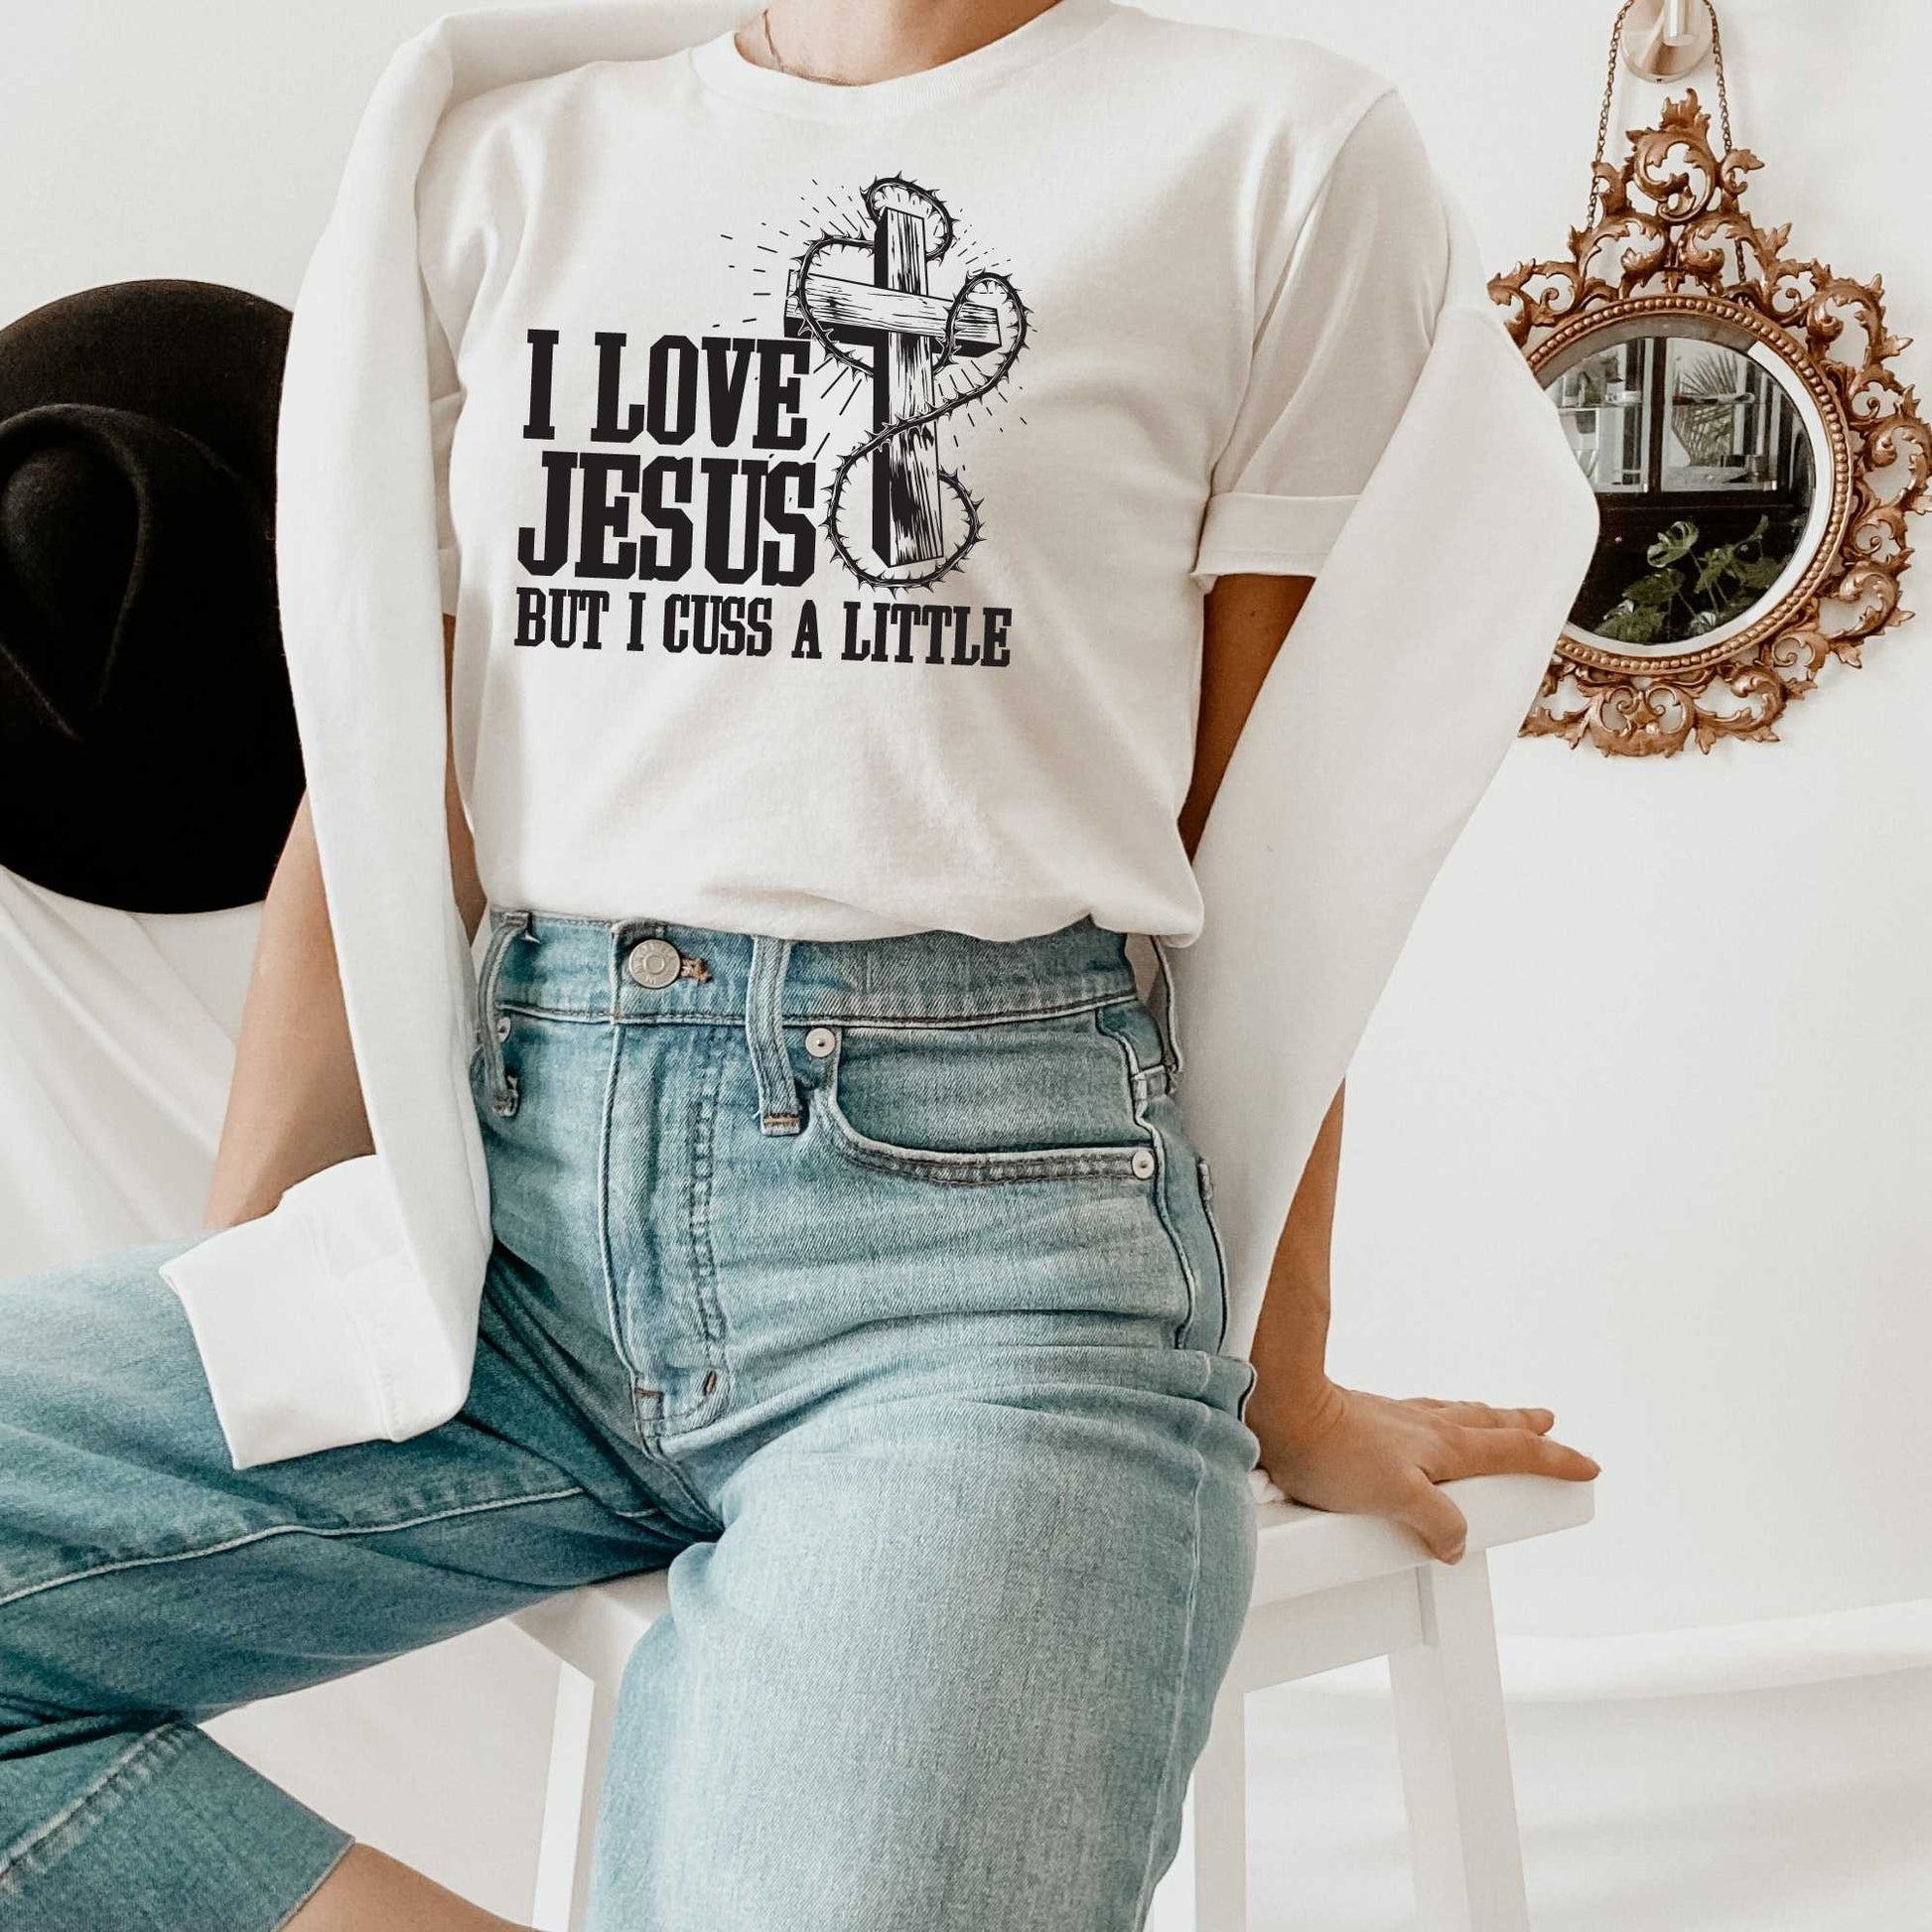 I love Jesus But I Cuss a Little, Funny Christian Shirts for Women or Men